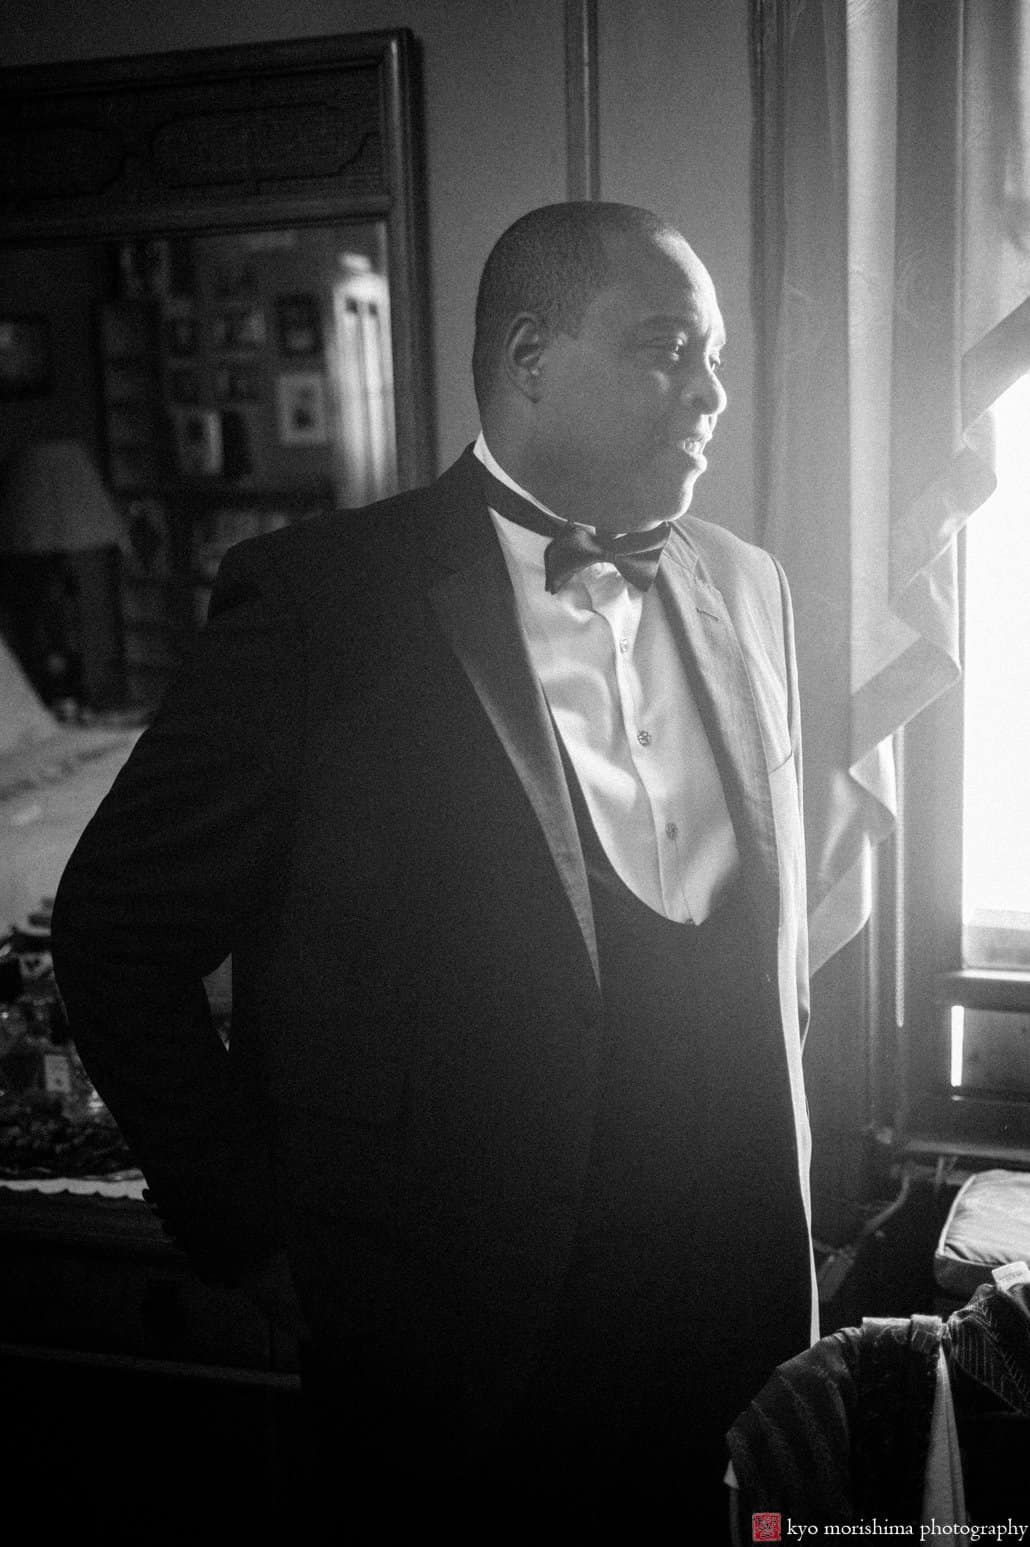 Groom smiles as light pours in the window of Harlem brownstone, photographed by Carlo Cipriani for Kyo Morishima Photography